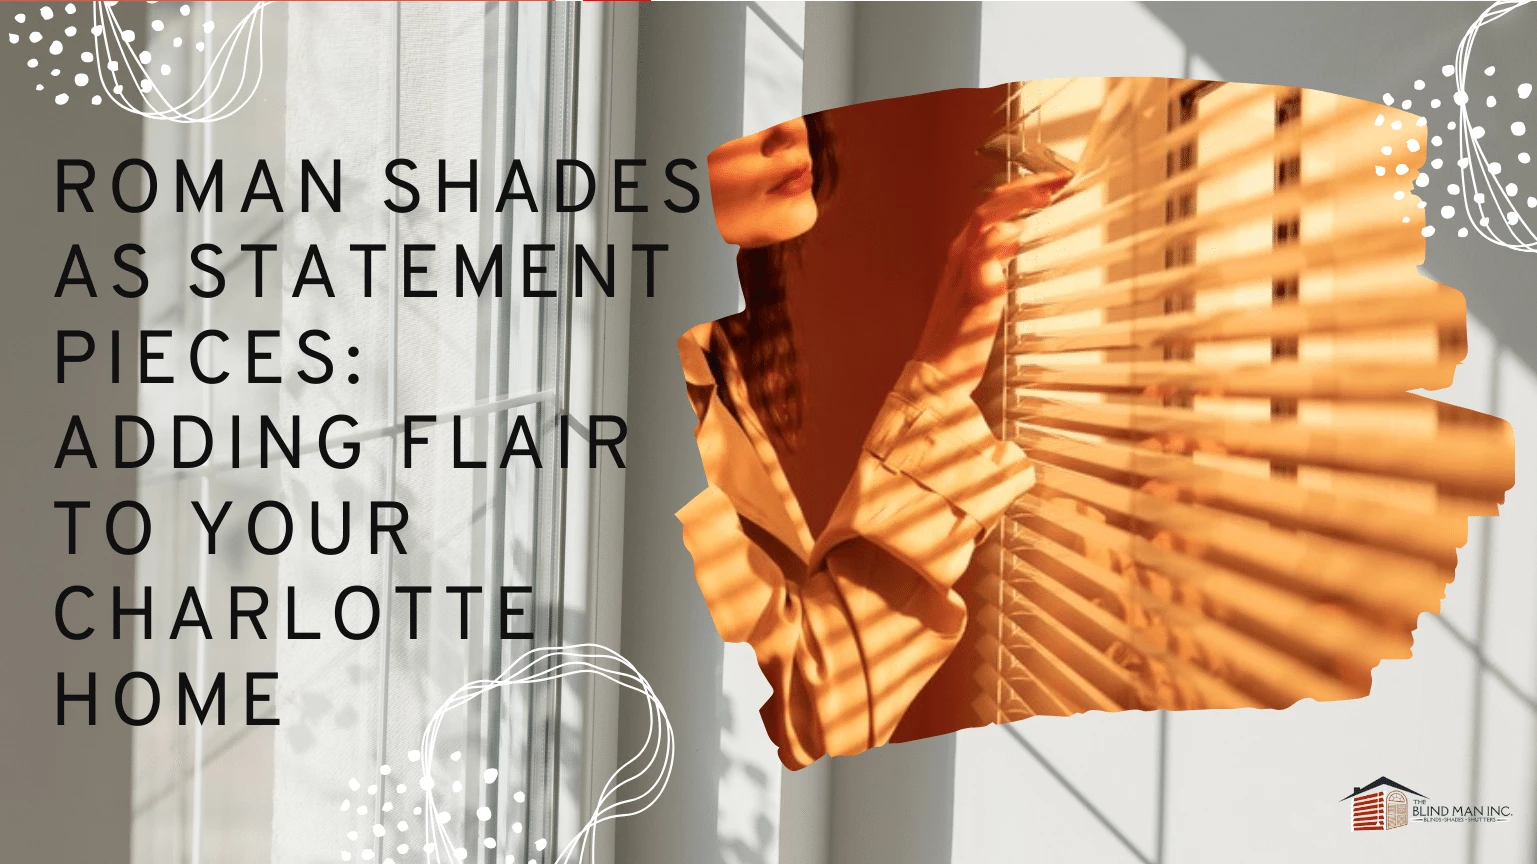 roman shades as statement pieces adding flair to your charlotte home